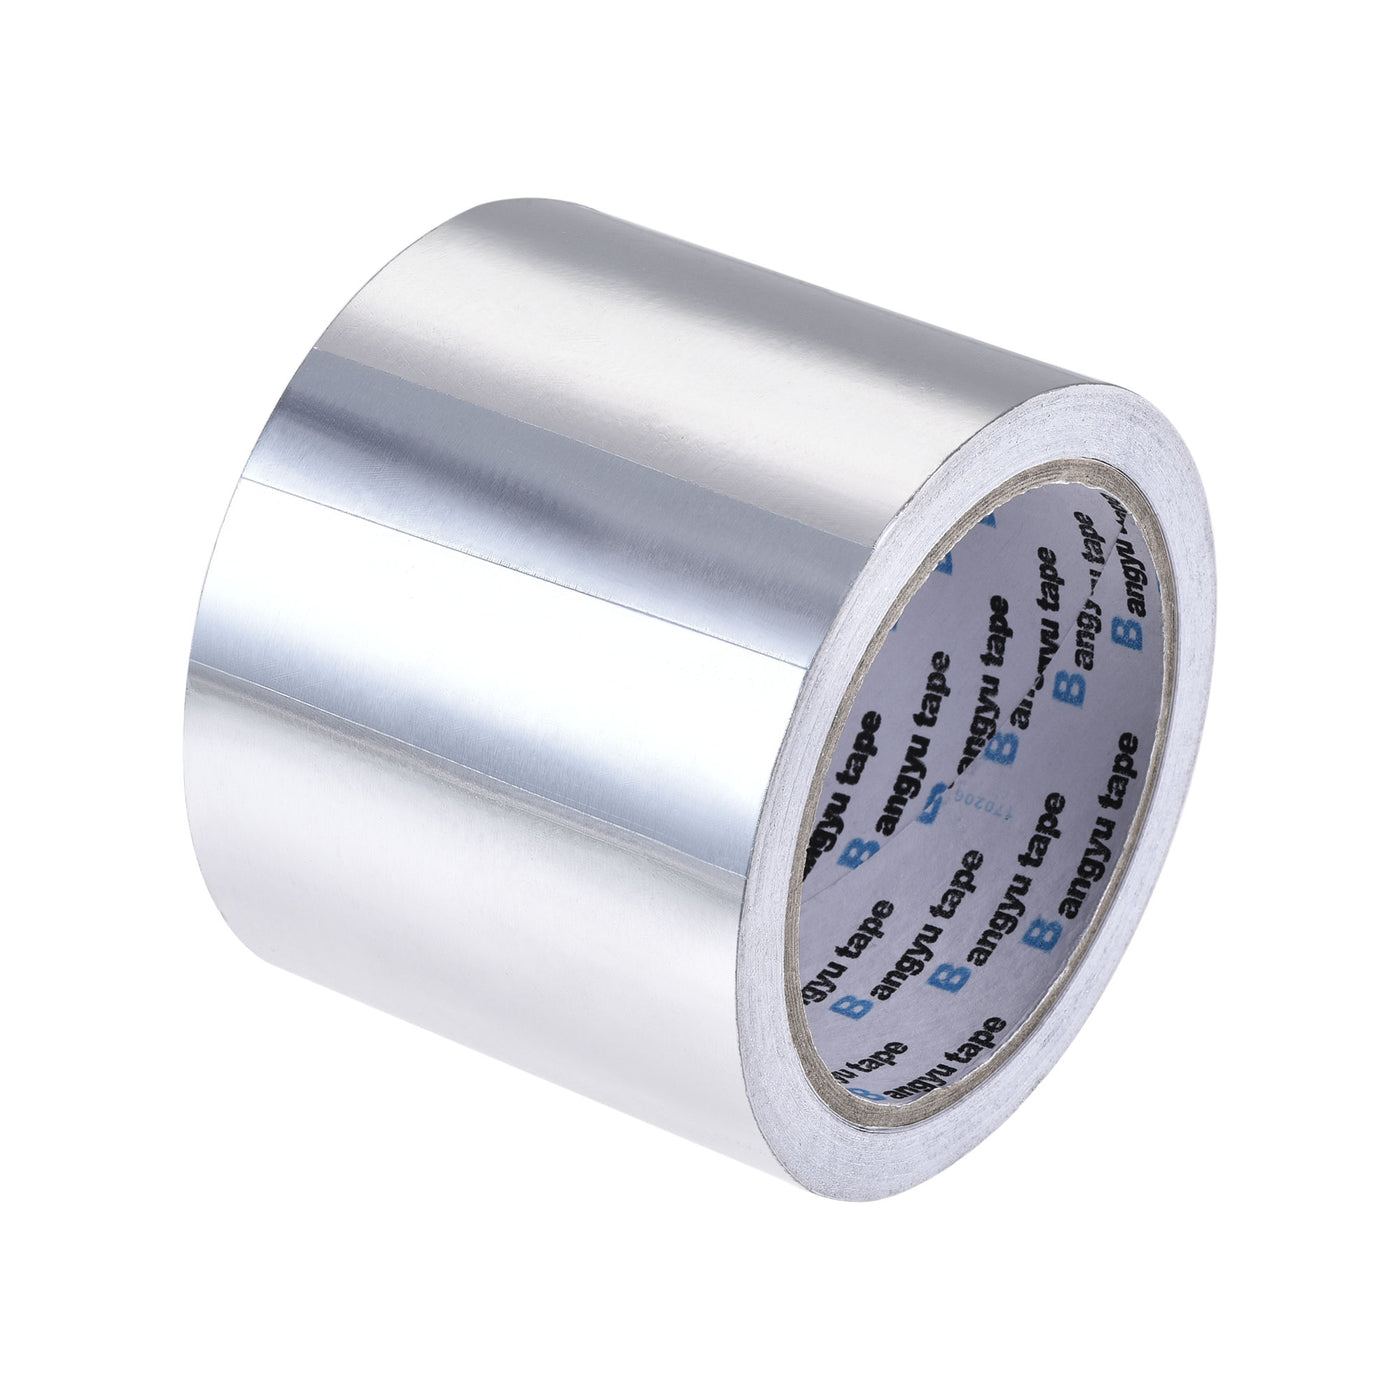 uxcell Uxcell Aluminum Foil Tape, 80mmx20m Self-adhesive Waterproof High Temperature Sealing Tapes for HVAC Duct Pipe Insulation